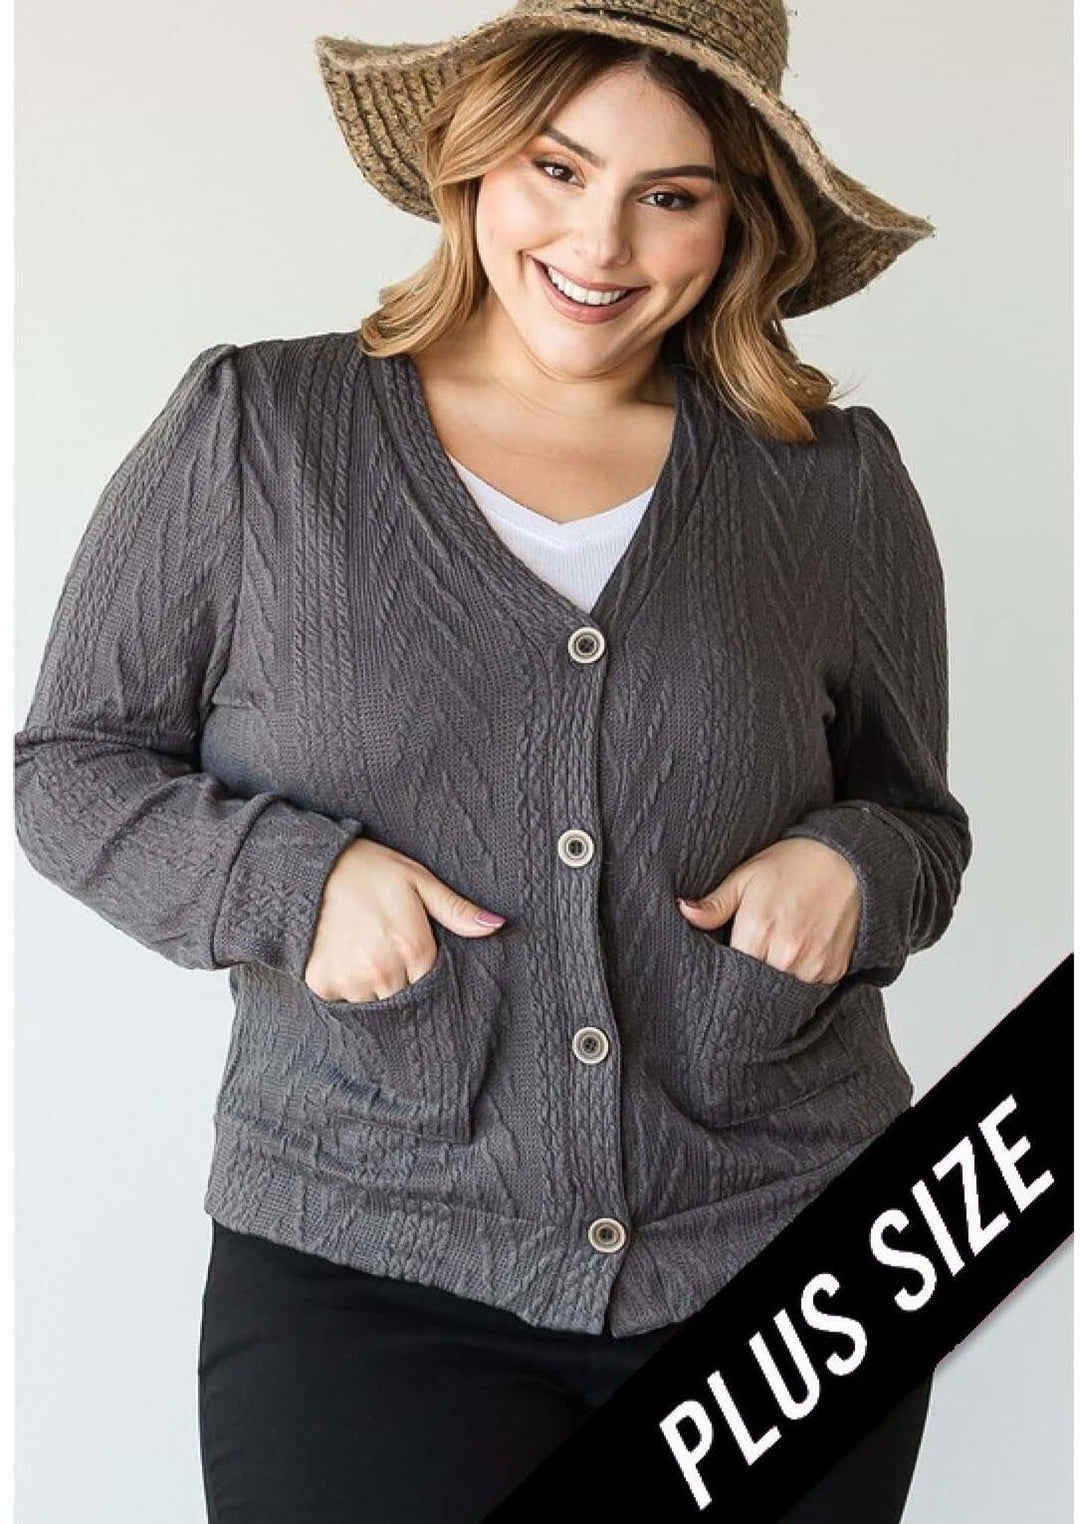 Ladies' Plus Size Cable Knit Classy Casual Button Down Cardigan in Charcoal Grey | Made in USA | Classy Cozy Cool Women's Made in America Clothing Boutique